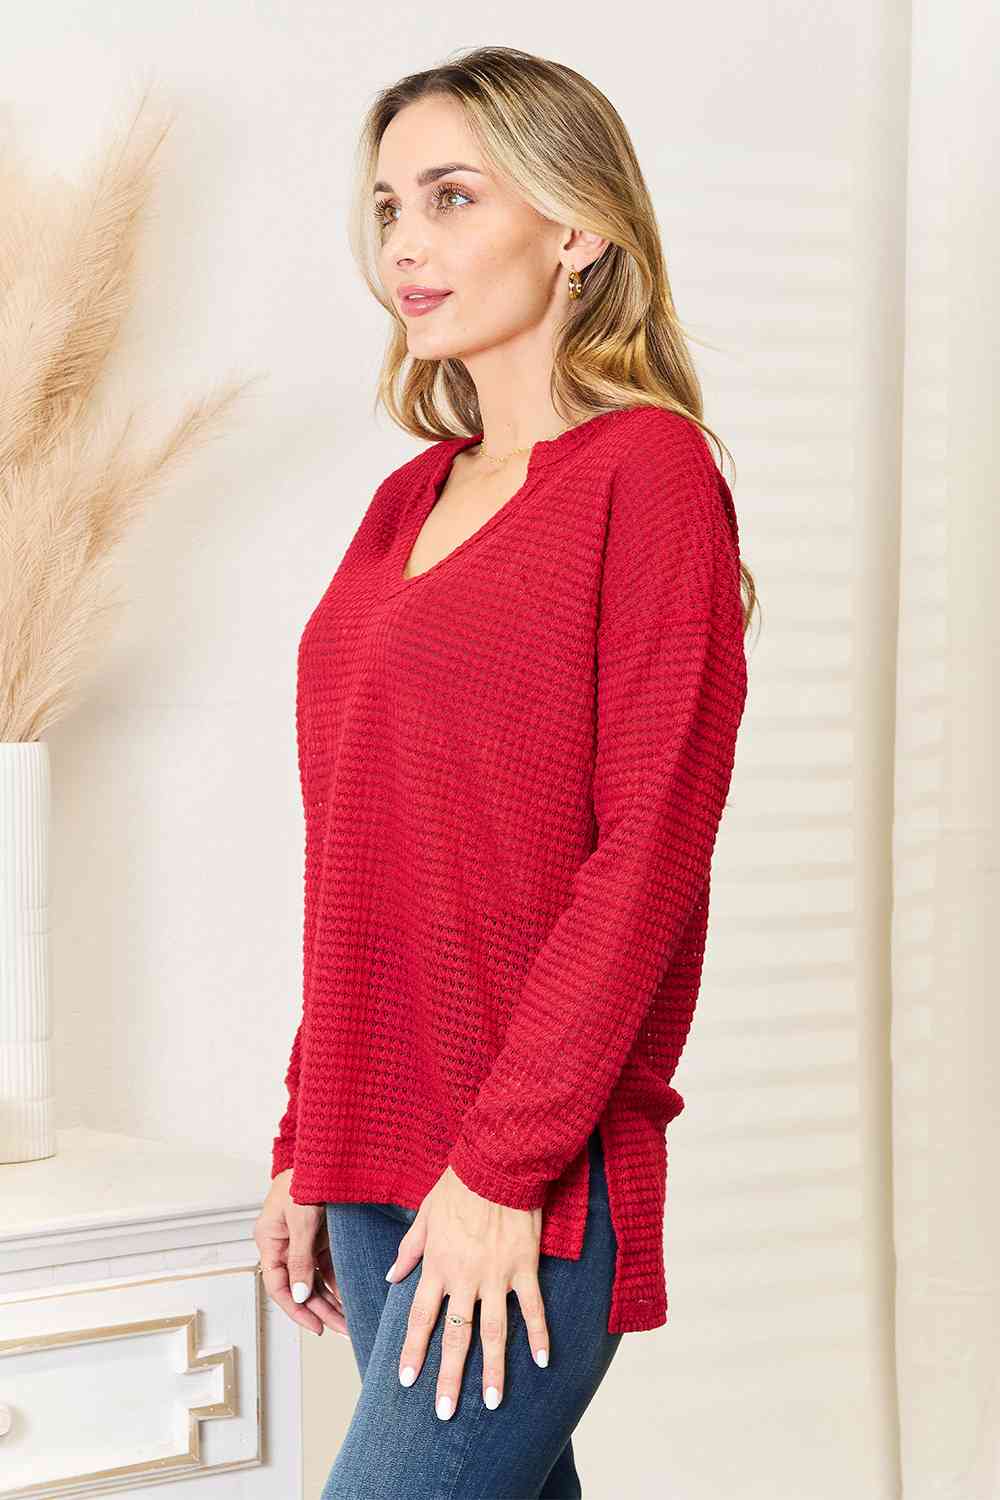 Culture Code Full Size Wide Notch Relax Top - Tigbuls Variety Fashion